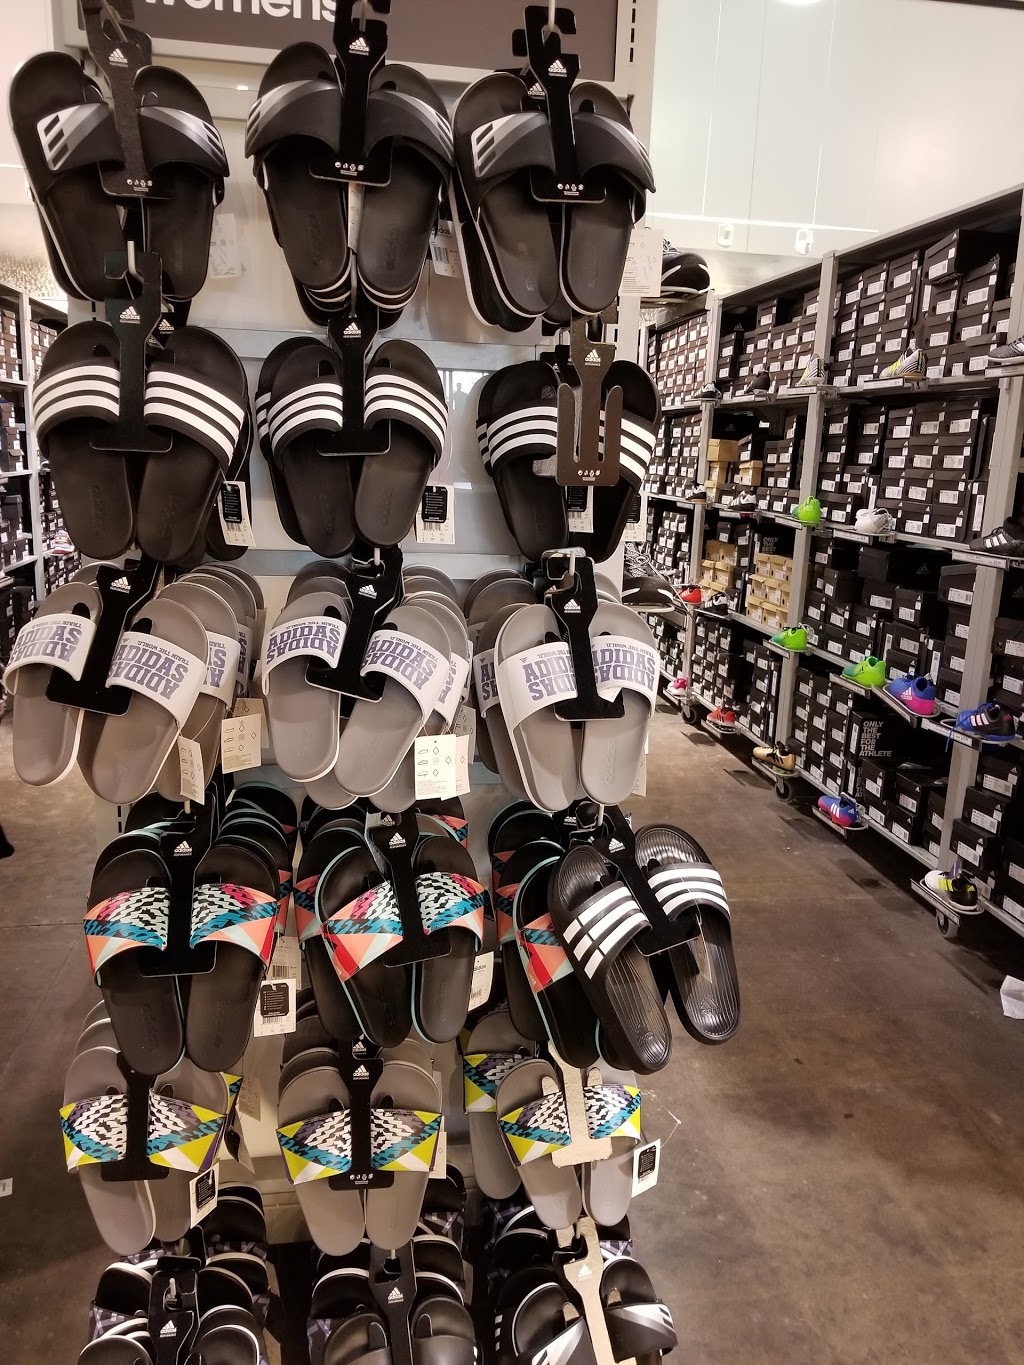 adidas Outlet Store - Heartland Town Centre | Heartland Town Centre, 5935 Mavis Rd Unit #1, Mississauga, ON L5R 3T7, Canada | Phone: (905) 267-0120